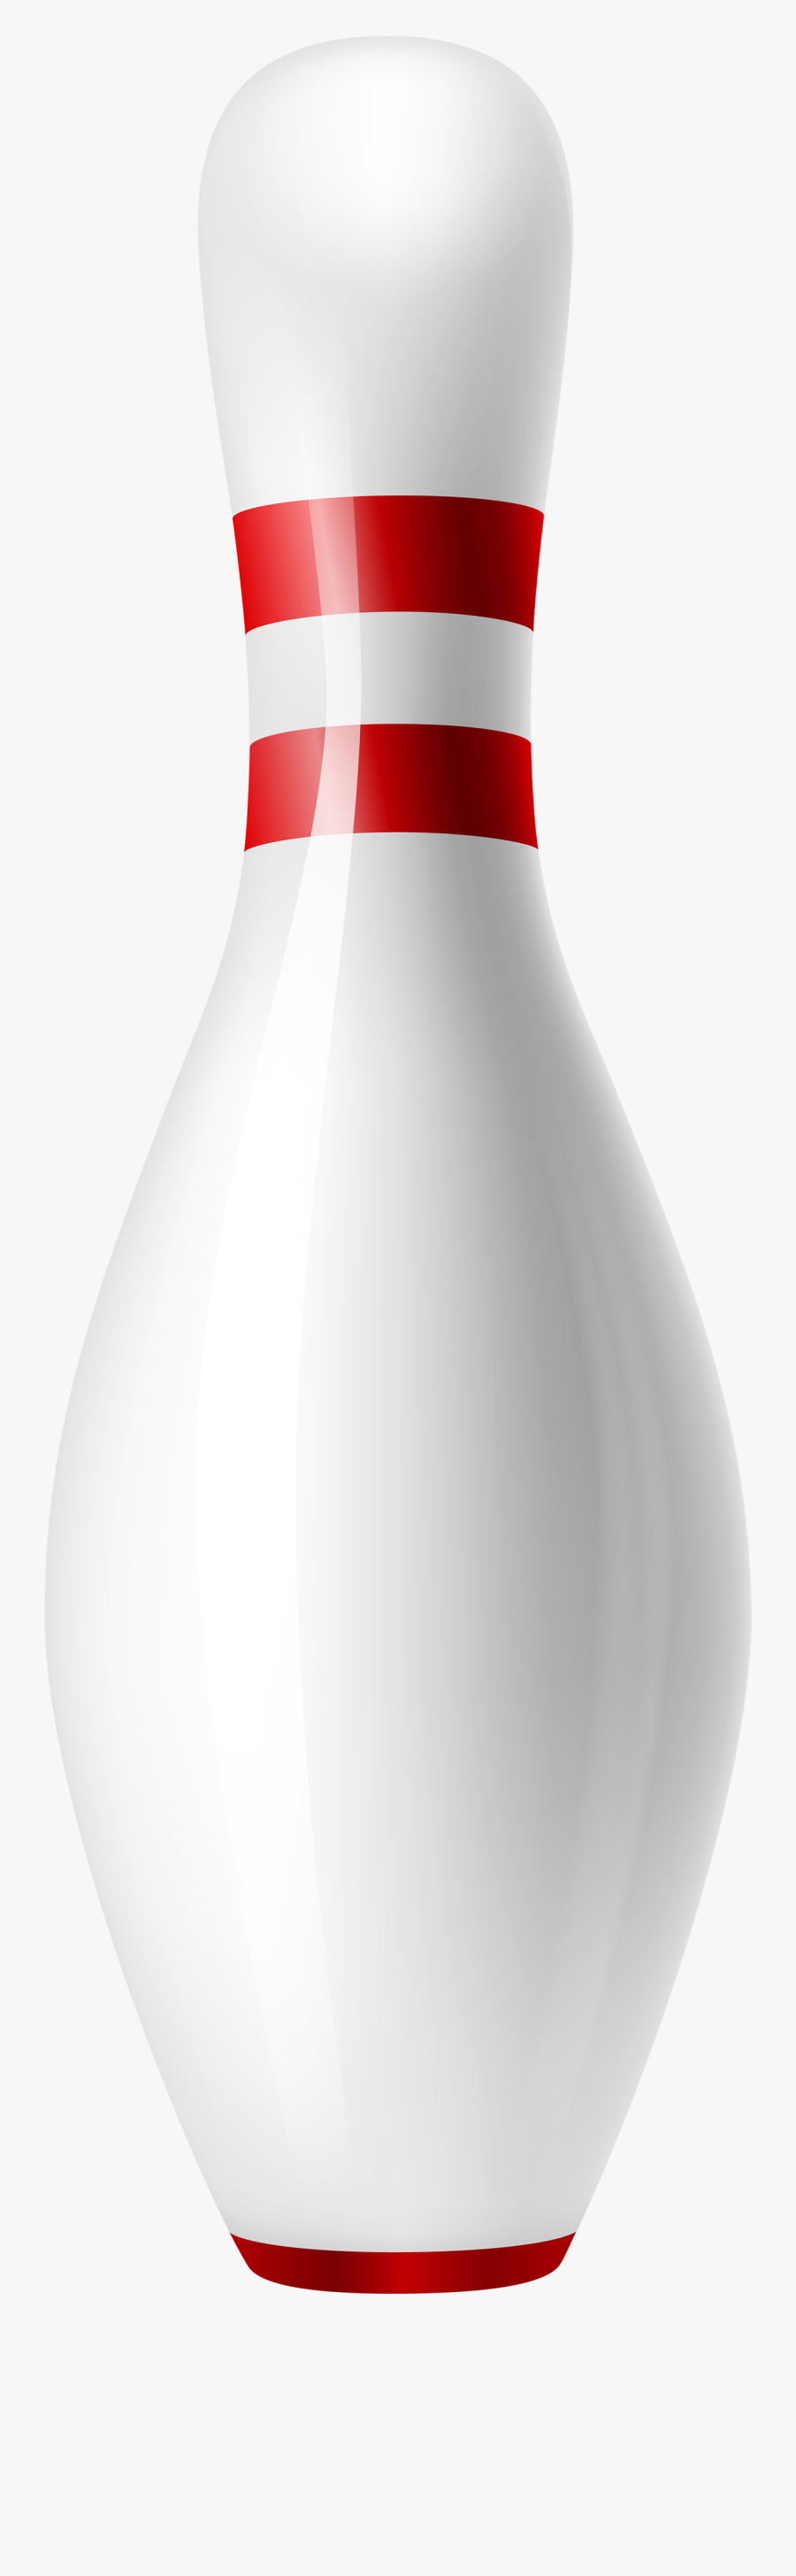 Single Bowling Clipart Png Images - Bowling Pin Png, Transparent Clipart